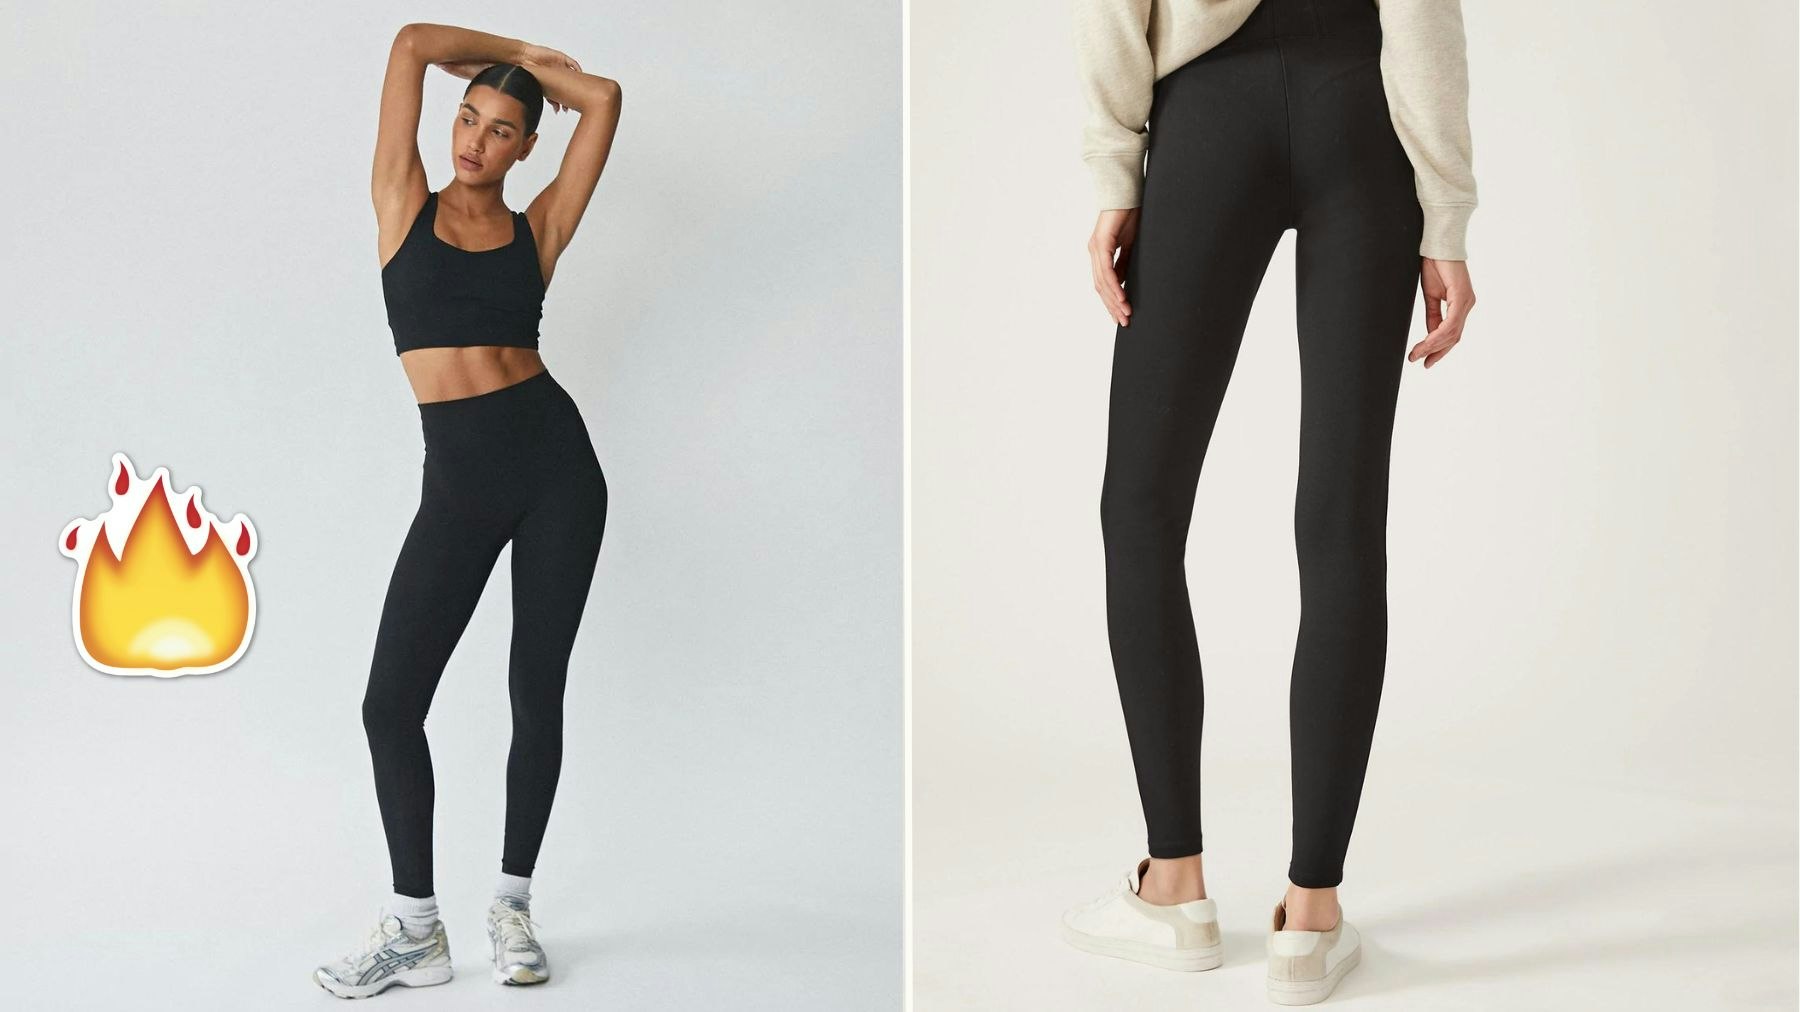 What do you think about women wearing yoga pants who are